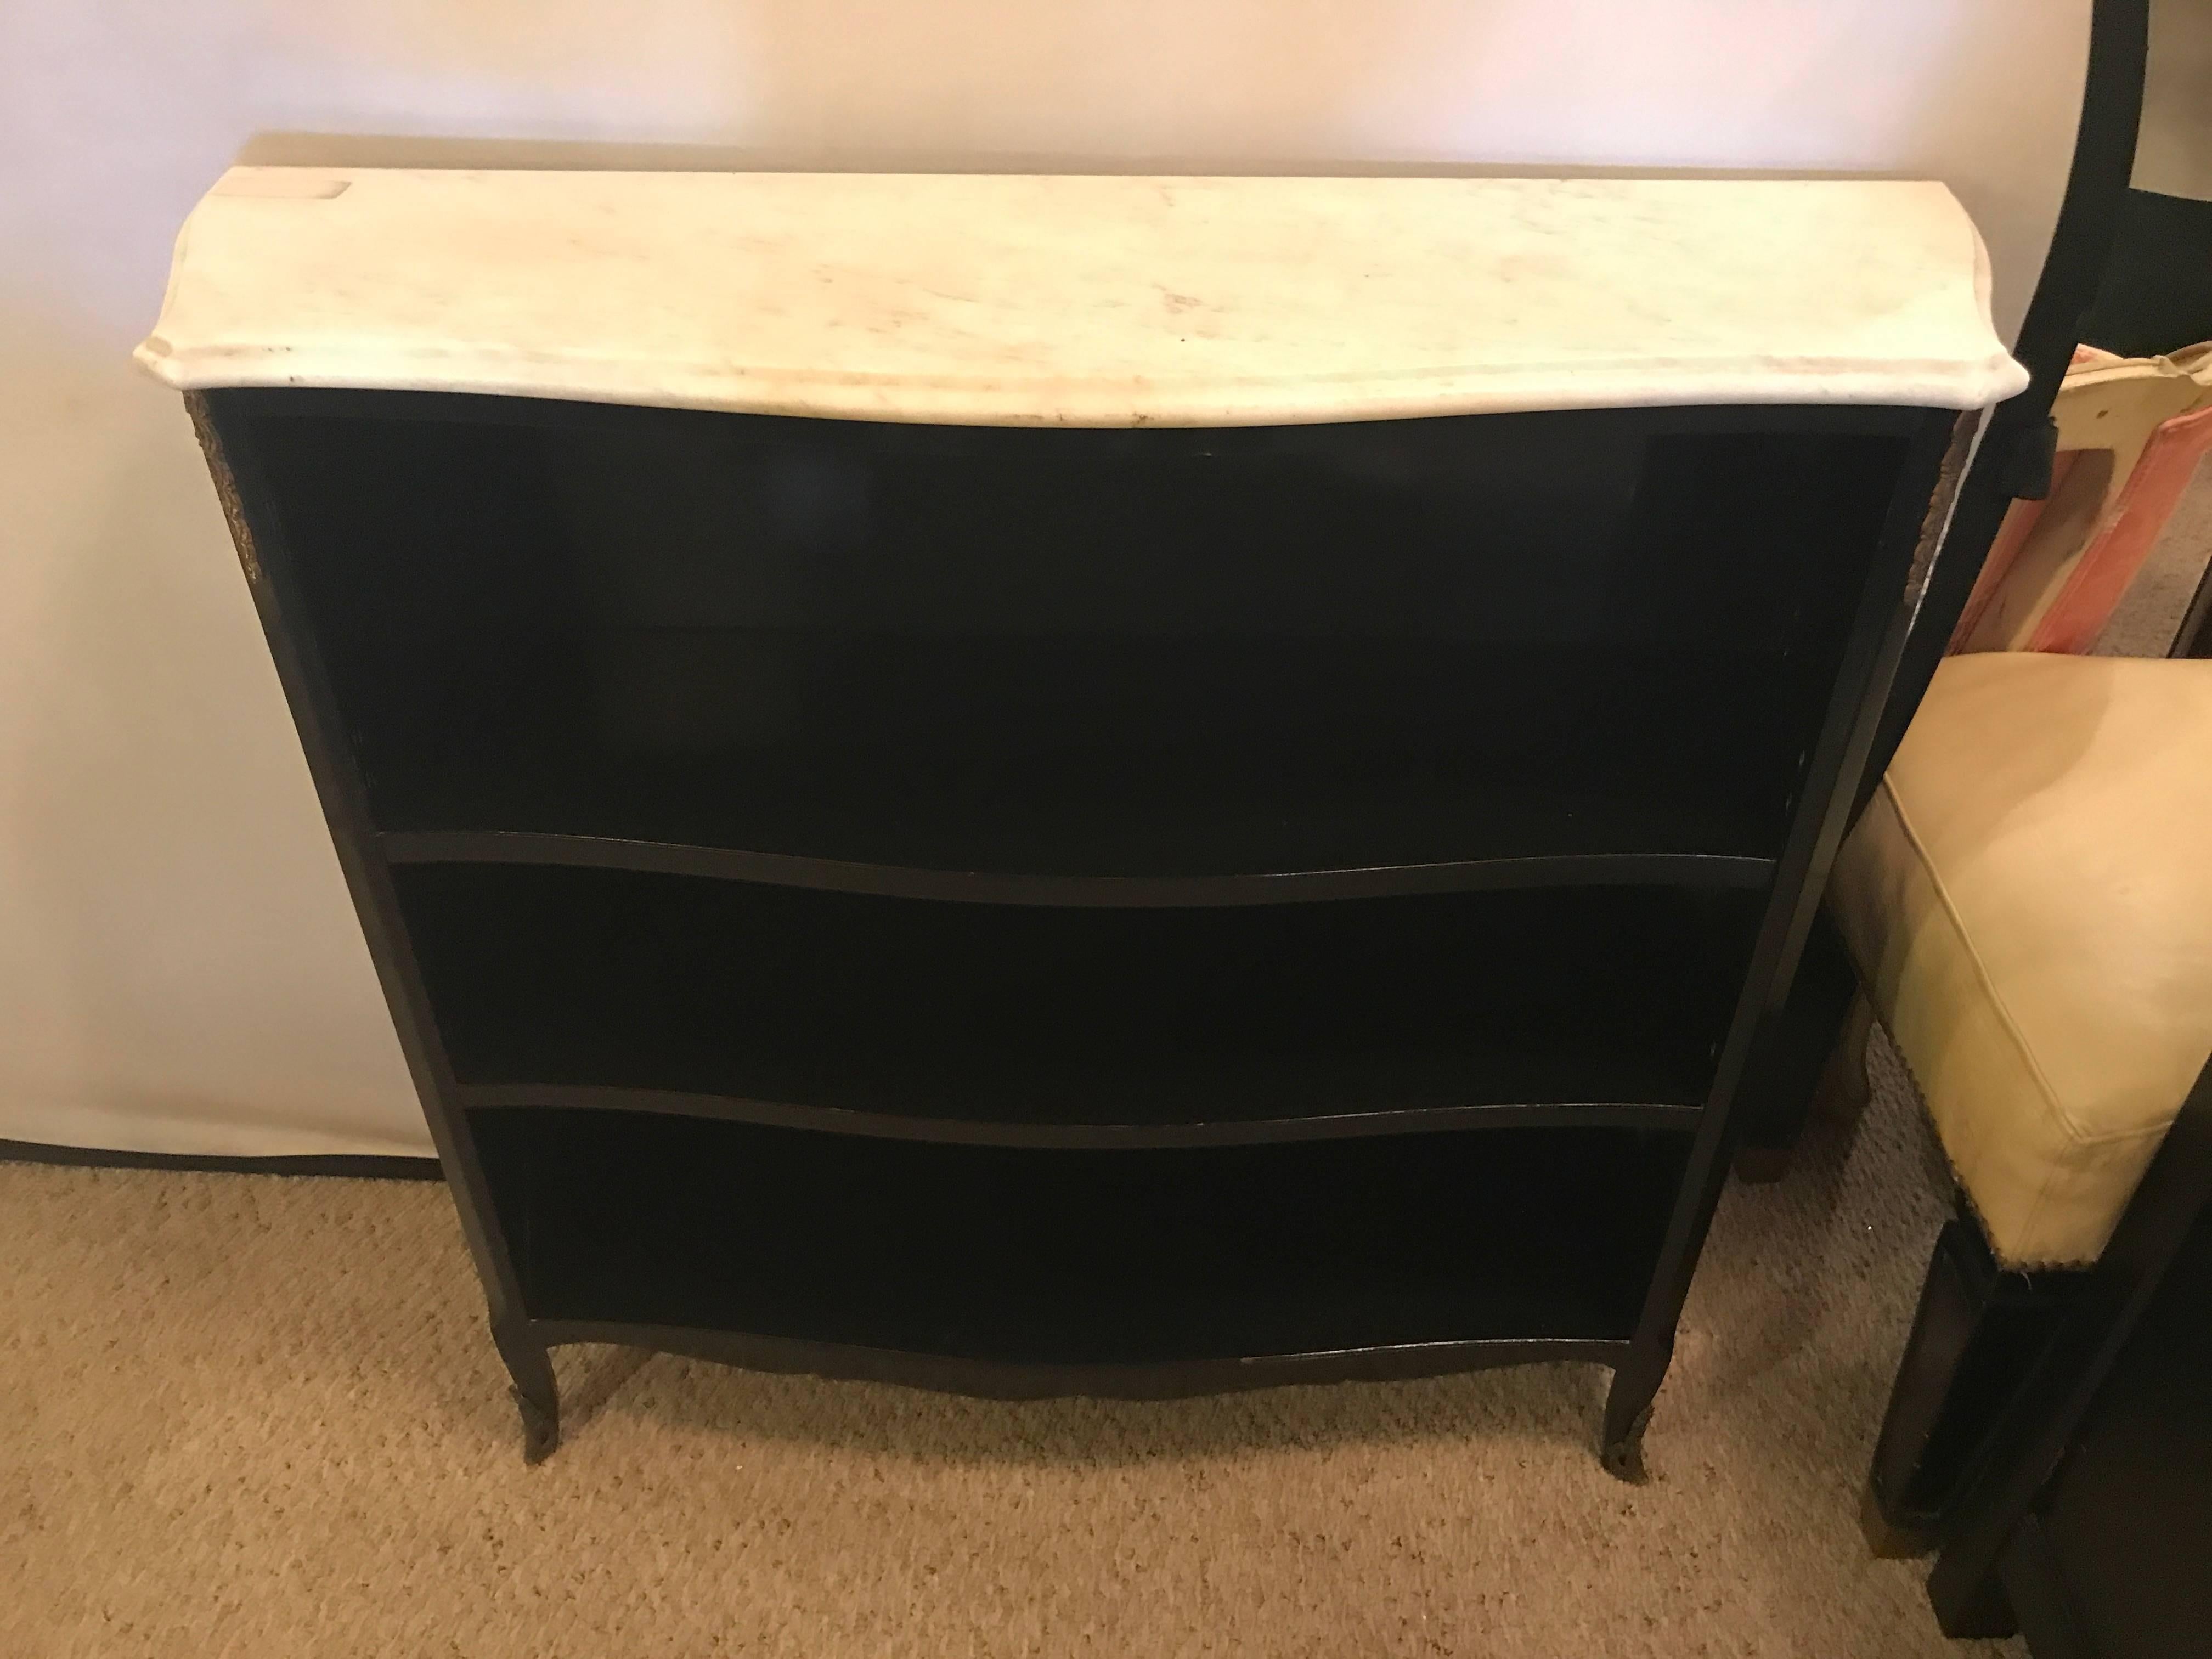 Hollywood Regency ebony marble-top bookcase or console table attributed to Maison Jansen. Having a white marble top supported by a case with three shelved areas for books. The corners and feet with bronze mounts.